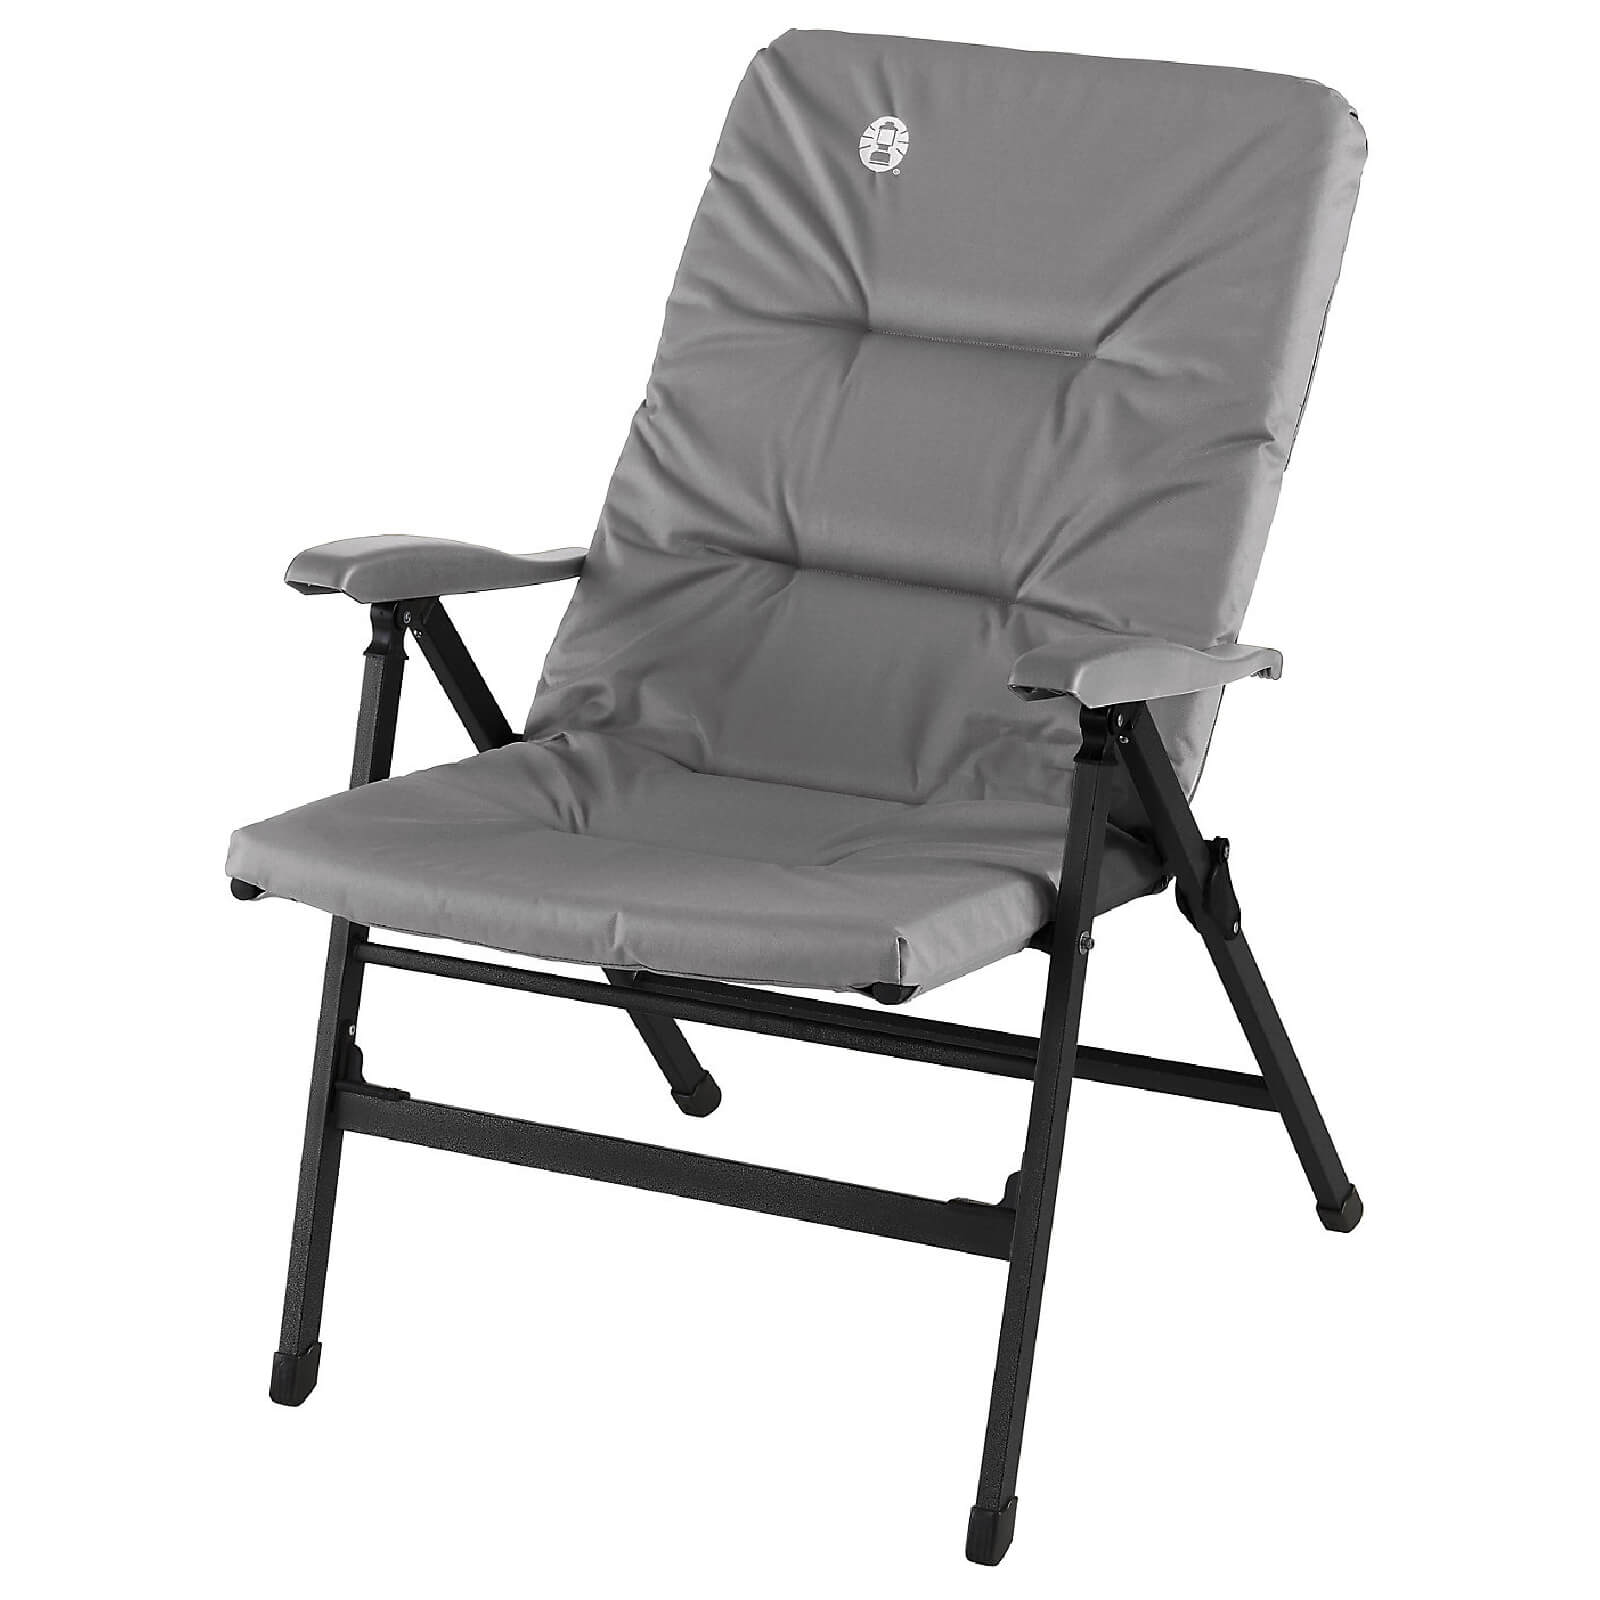 Camping Furniture Coleman 8 Position Recliner Steel Chair